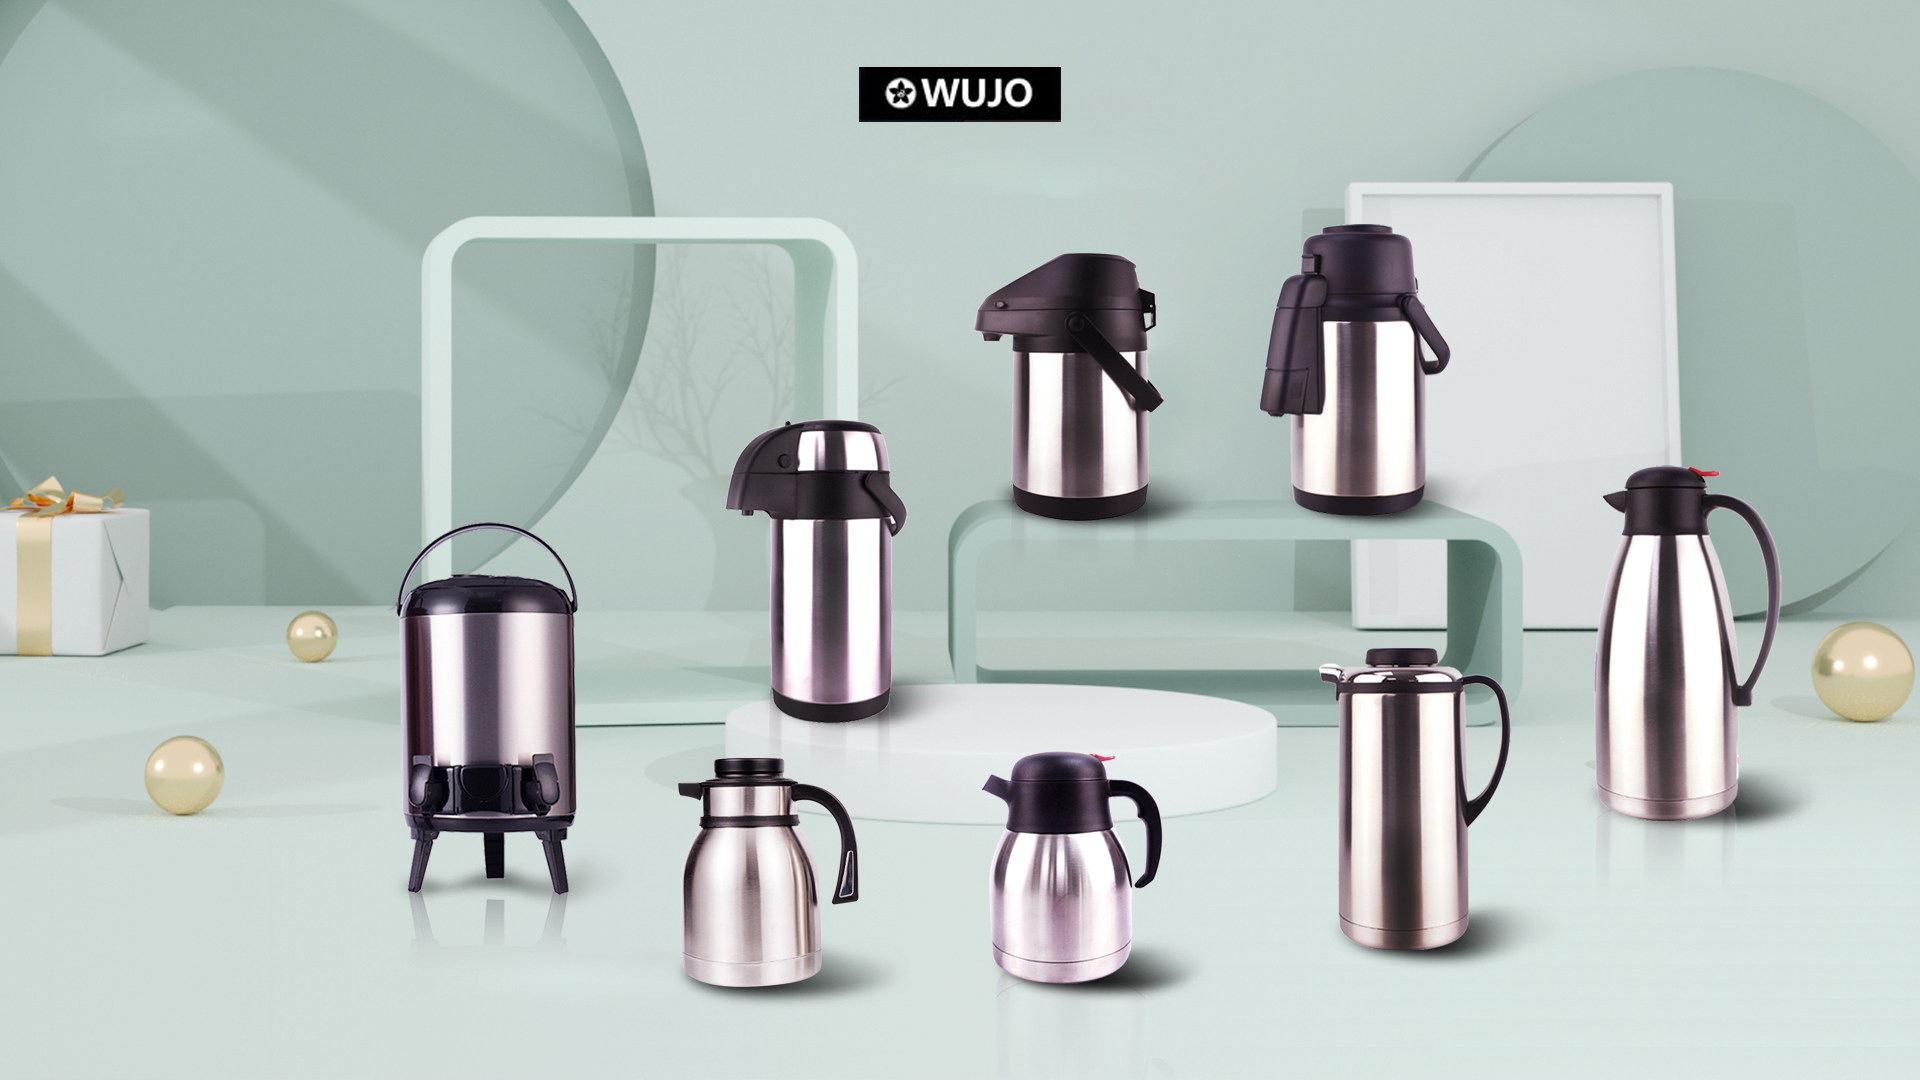 WUJO 24hr 2 Liter Hot Cold Water Coffee Tea Silver Double Wall Stainless Steel Thermo